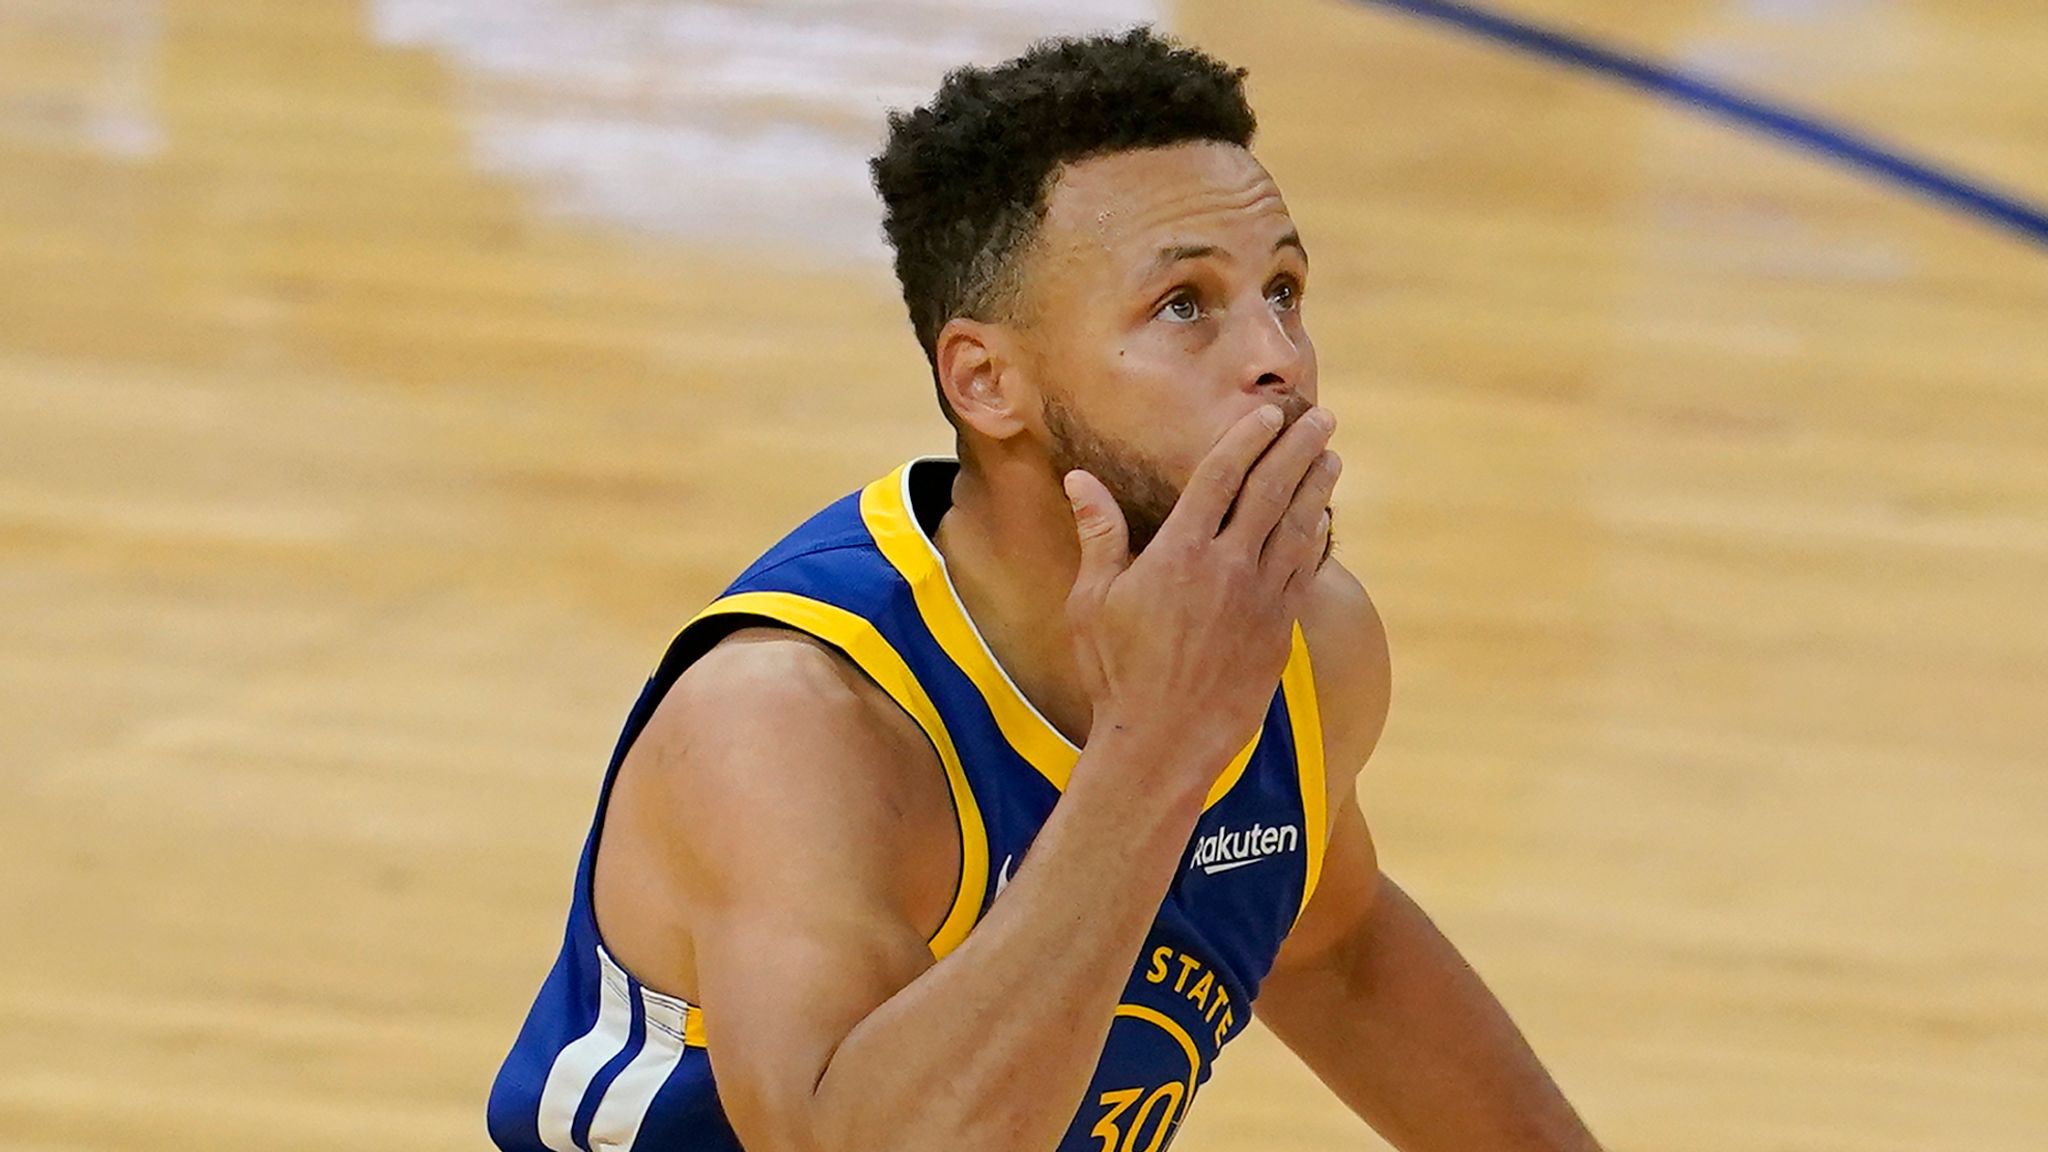 Watch Steph Curry's Ridiculous Pass To Draymond Green - Fastbreak